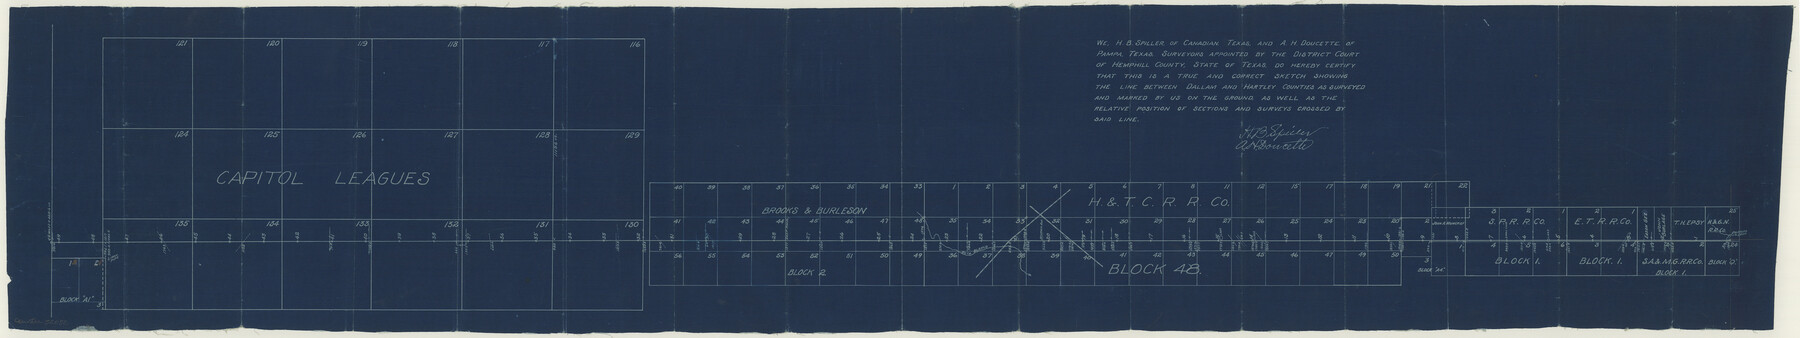 52082, Dallam County Boundary File 4, General Map Collection